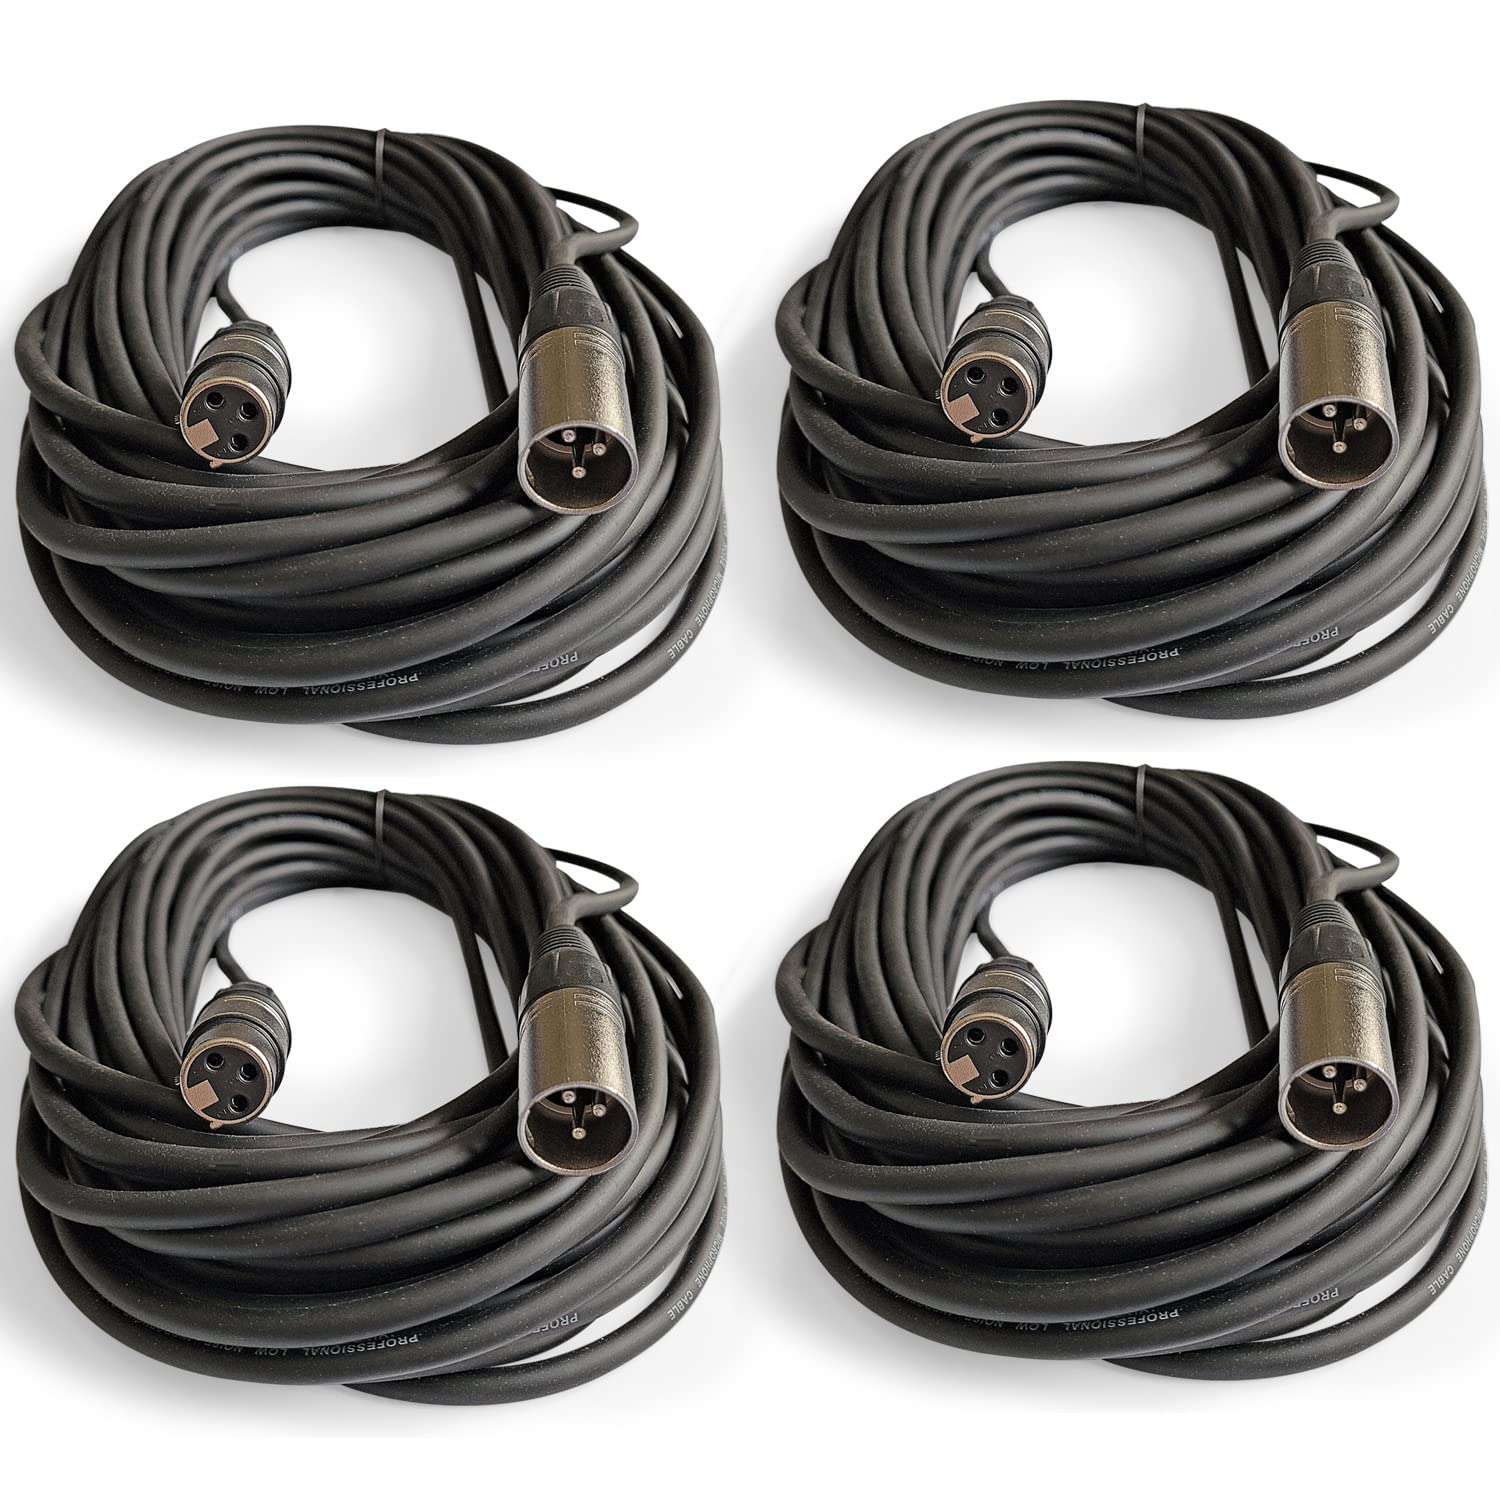 AxcessAbles 20ft XLR Male to Female Microphone Cable | U.S. Based Small Business | Shielded Microphone Cord | DJ Mic Cable | XLR to XLR Balanced Cable | AxcessAbles 20ft XLR Mic Cable (4-Pack)